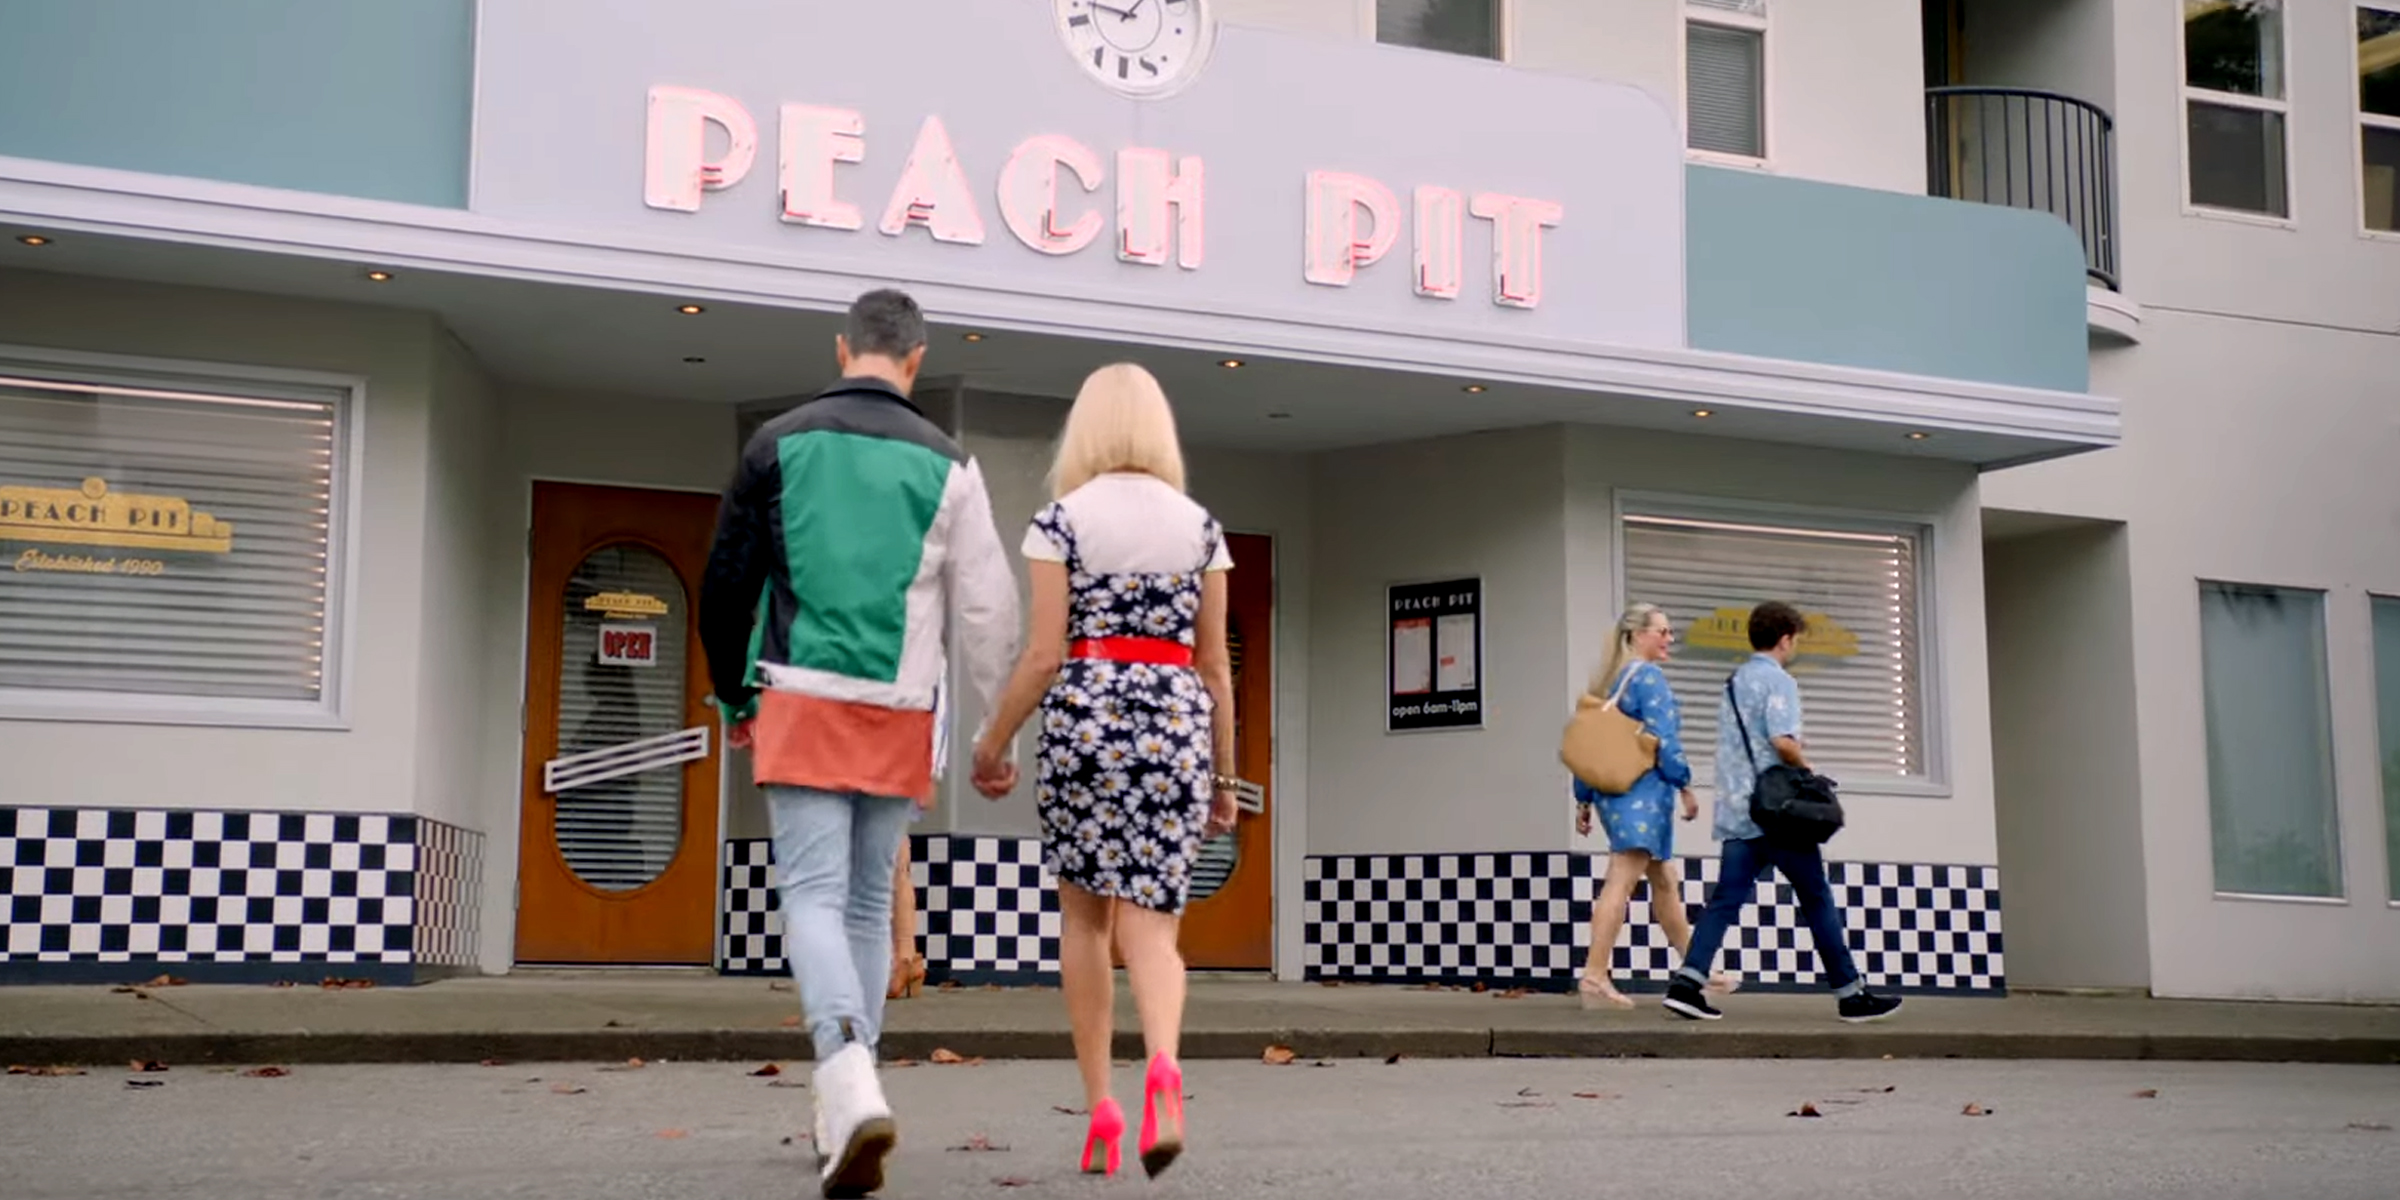 Flood The Peach Pit From “beverly Hills 90210” Is Coming To La